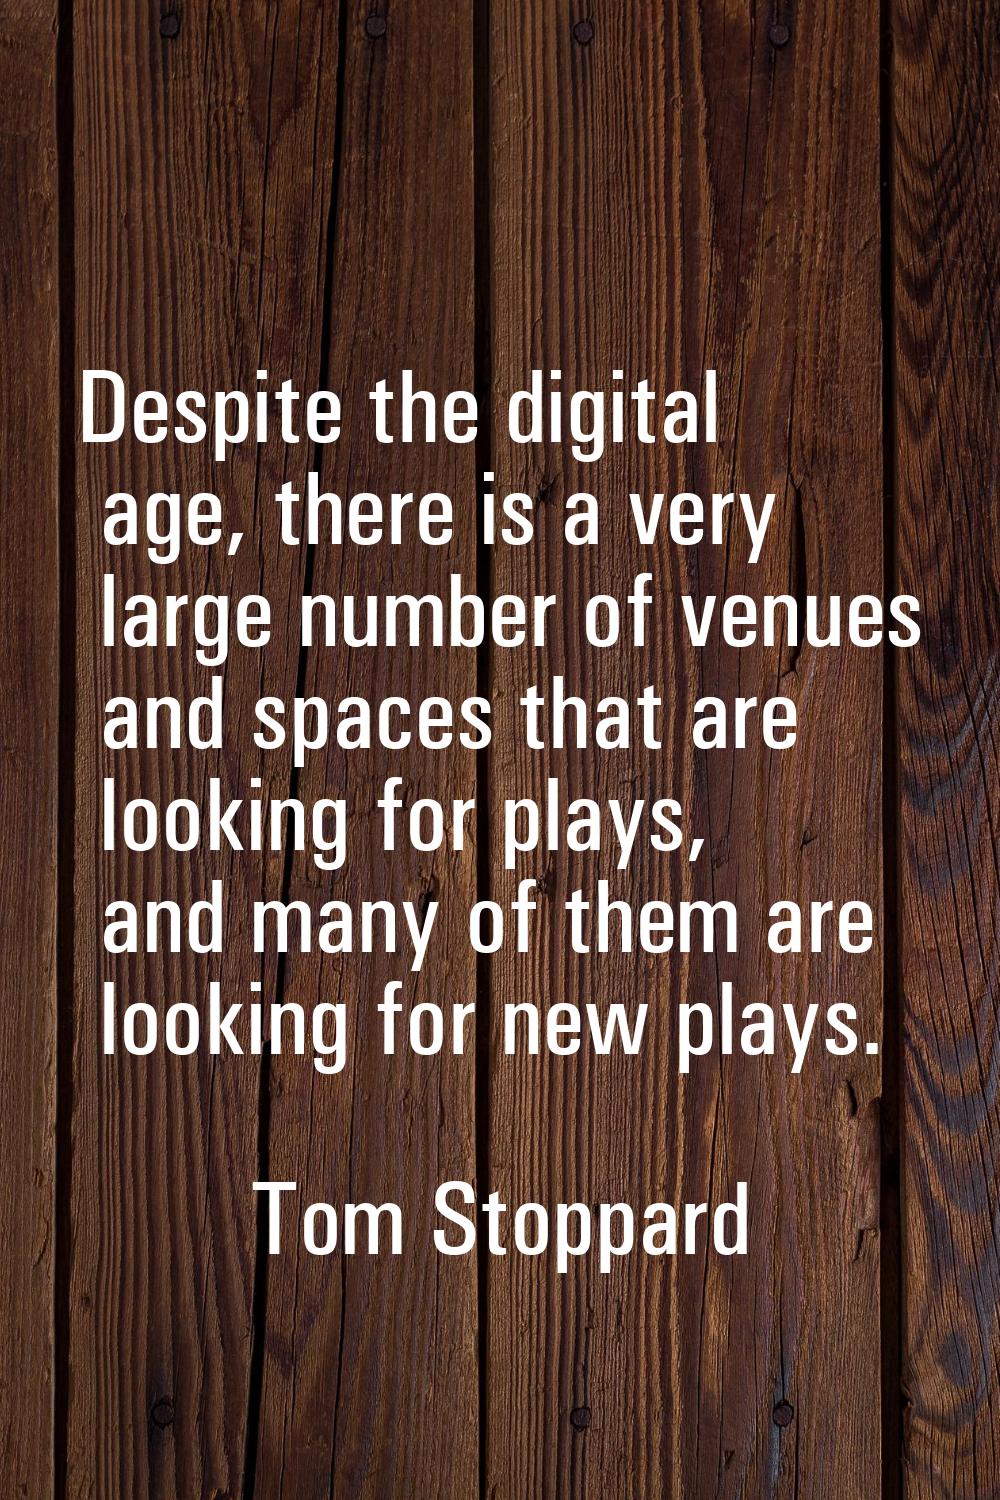 Despite the digital age, there is a very large number of venues and spaces that are looking for pla